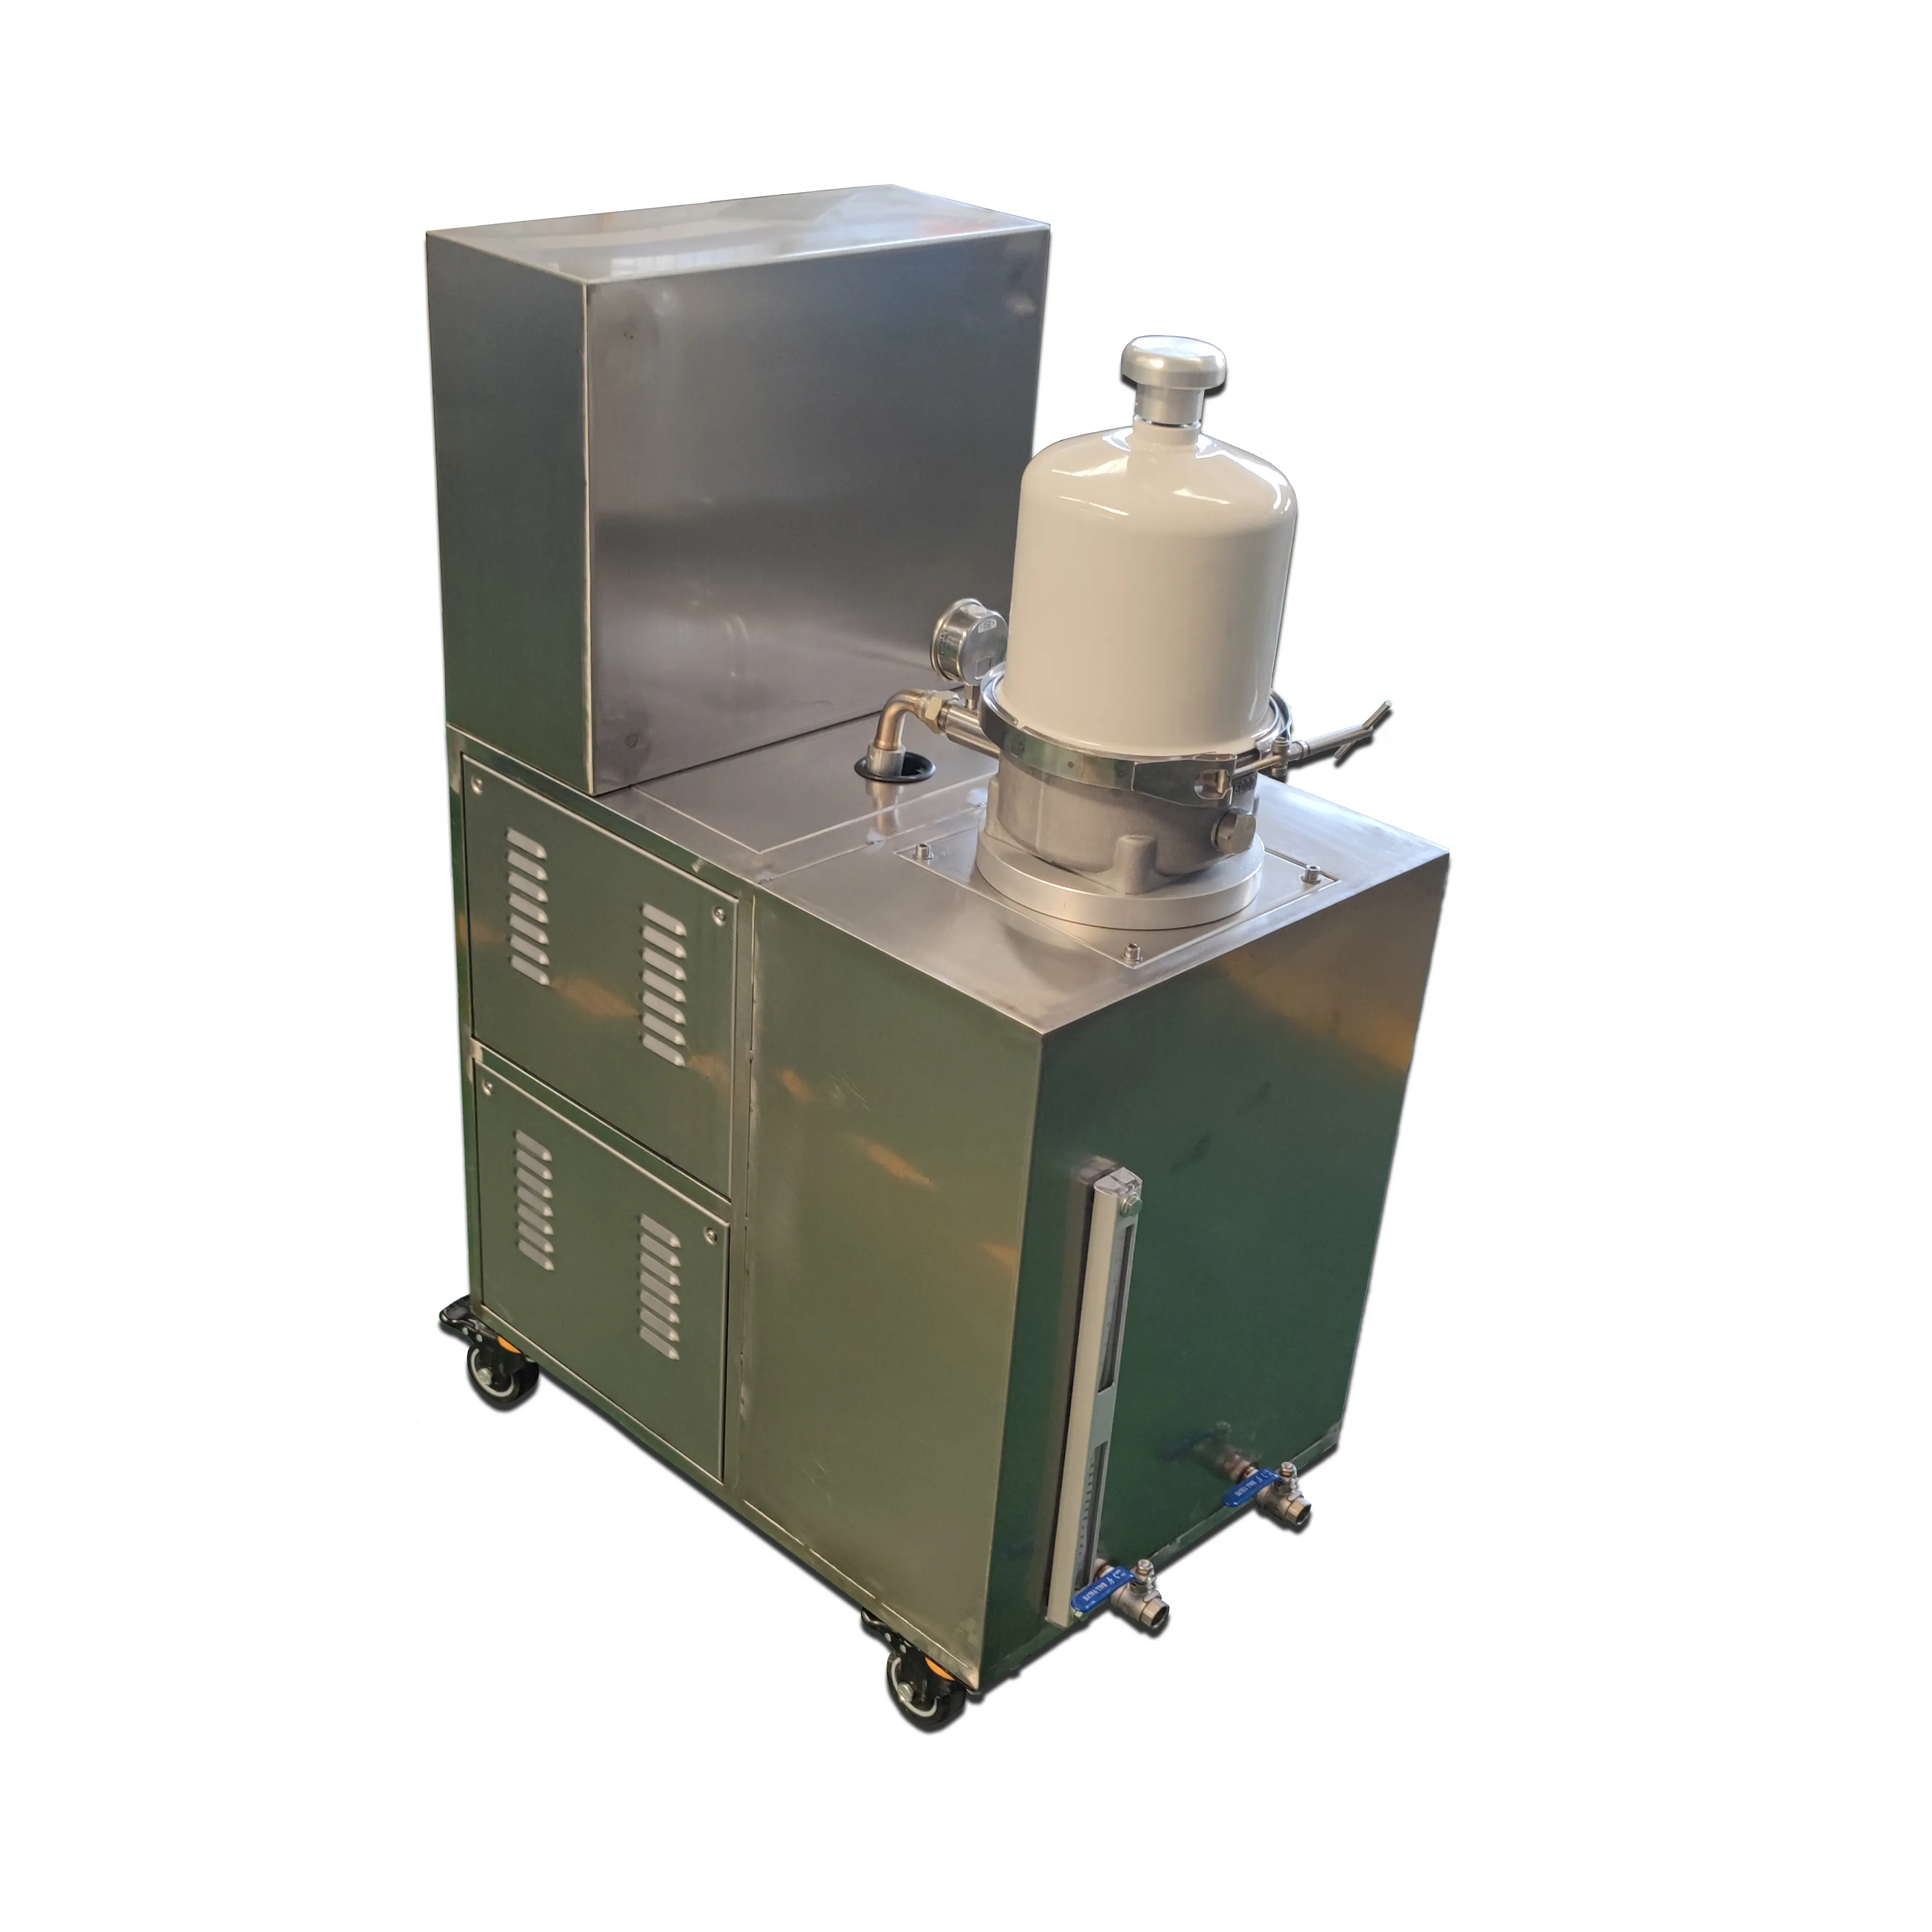 Oil purification machine for refrigeration oil